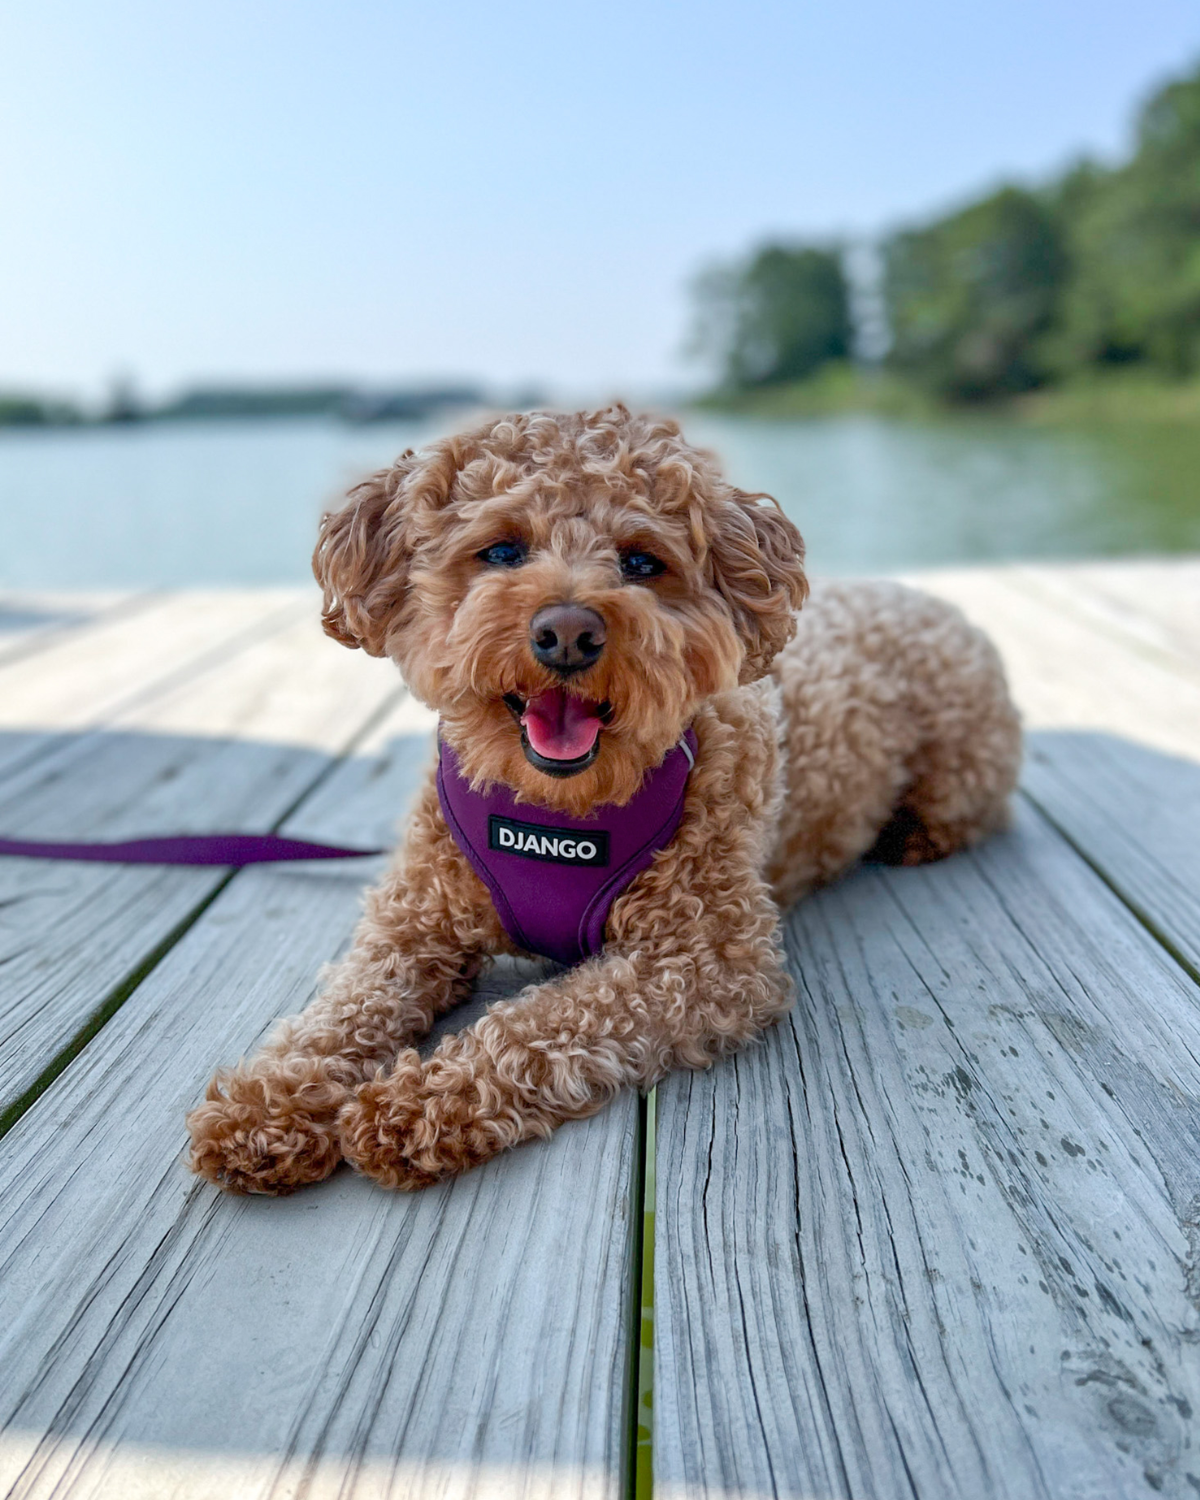 Beautiful girl Maisey is a poodle and bichon mix and wears a size small dog harness . Sizing questions? Email hello@djangobrand.com, we'd love to hear from you and help you out! - djangobrand.com